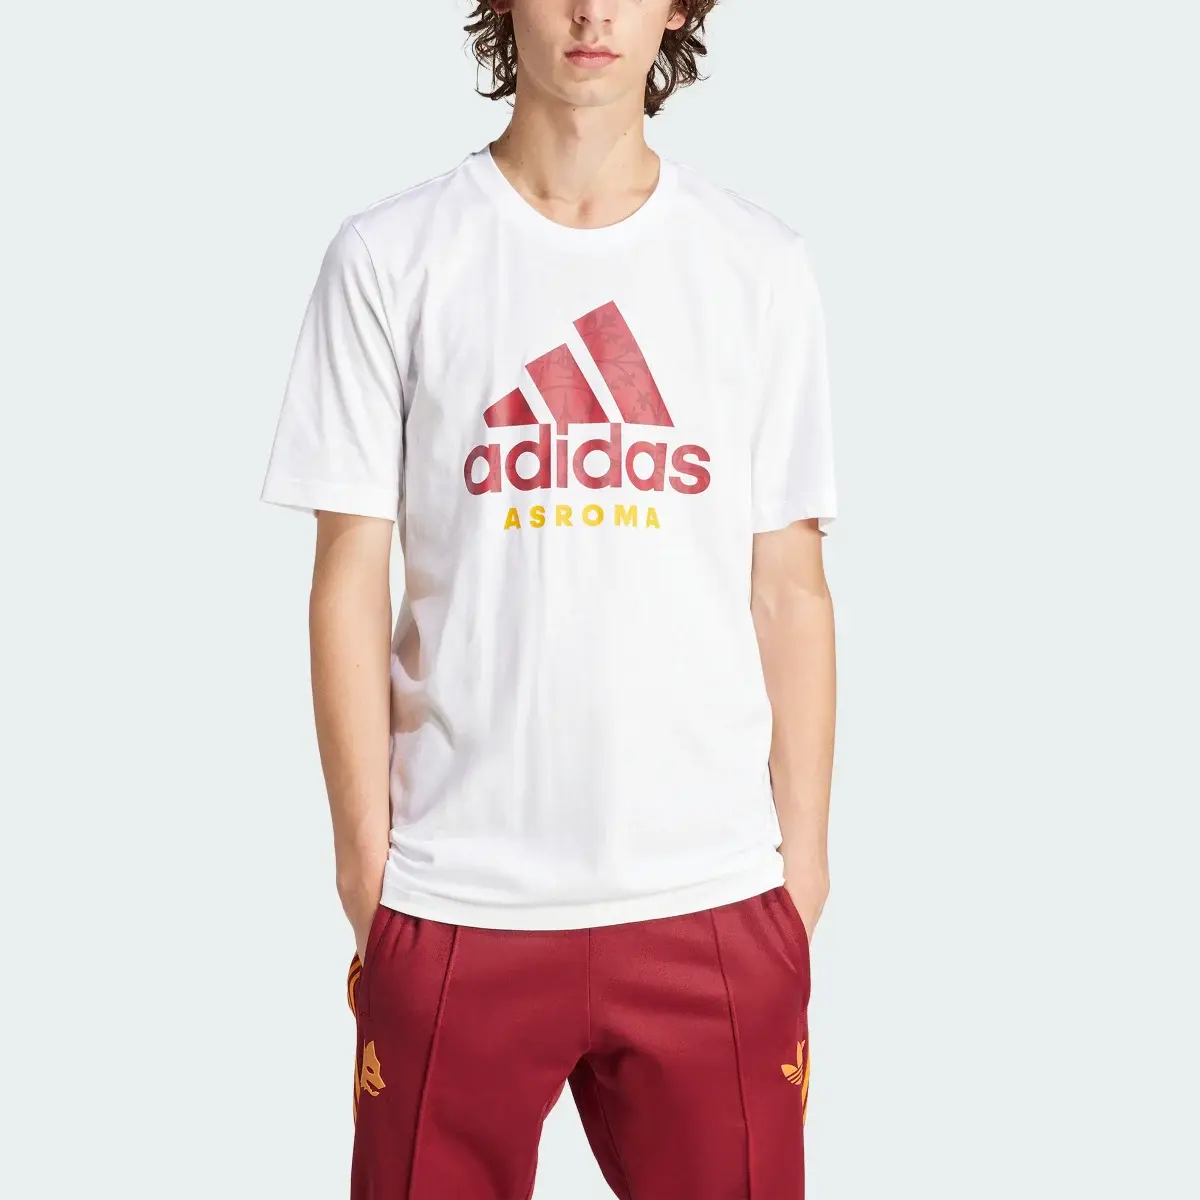 Adidas AS Roma DNA Graphic T-Shirt. 1